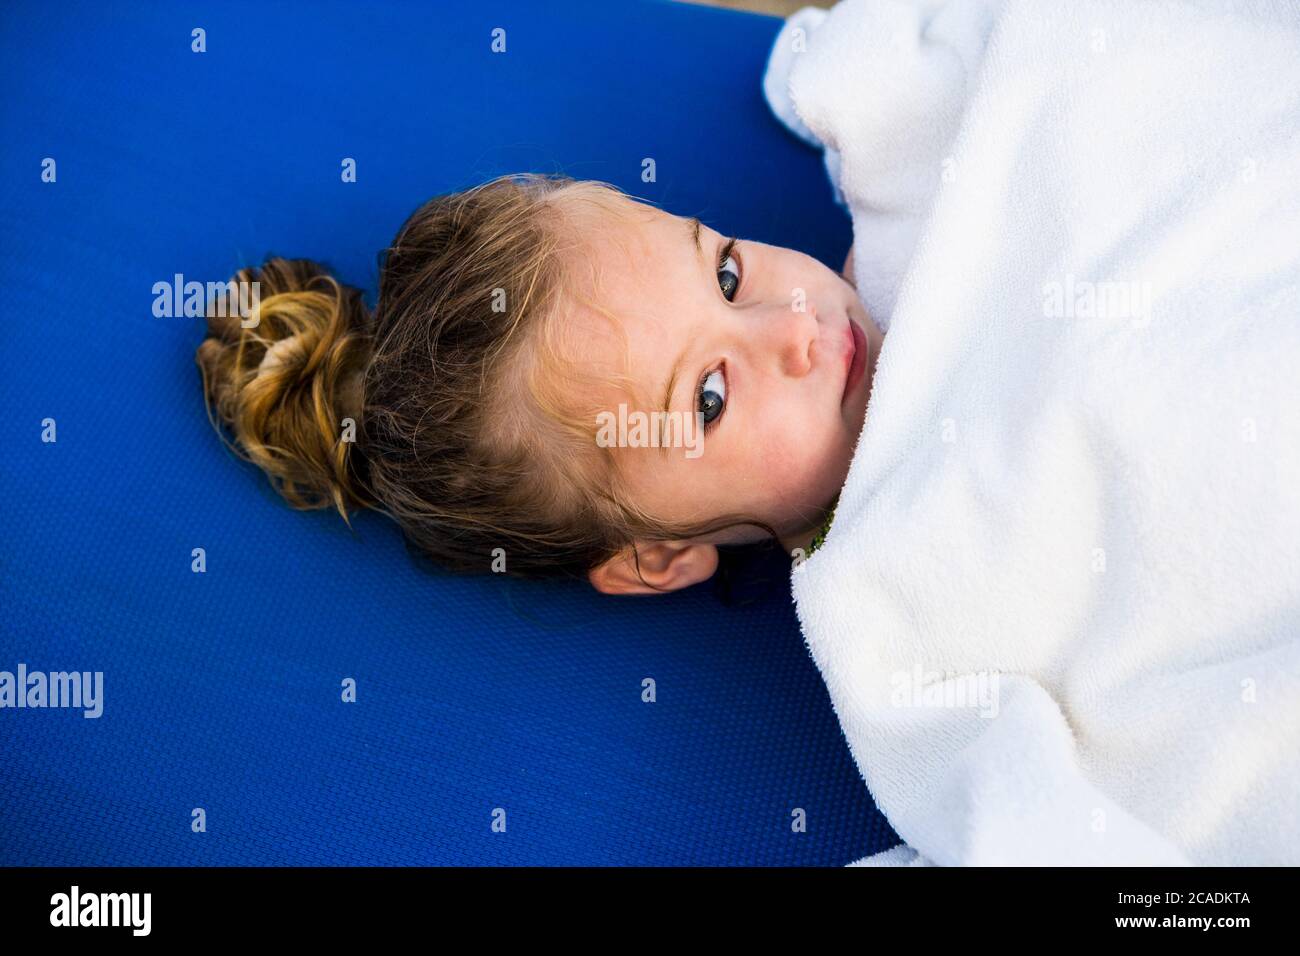 portrait of 3 year old girl wrapped in white towel Stock Photo